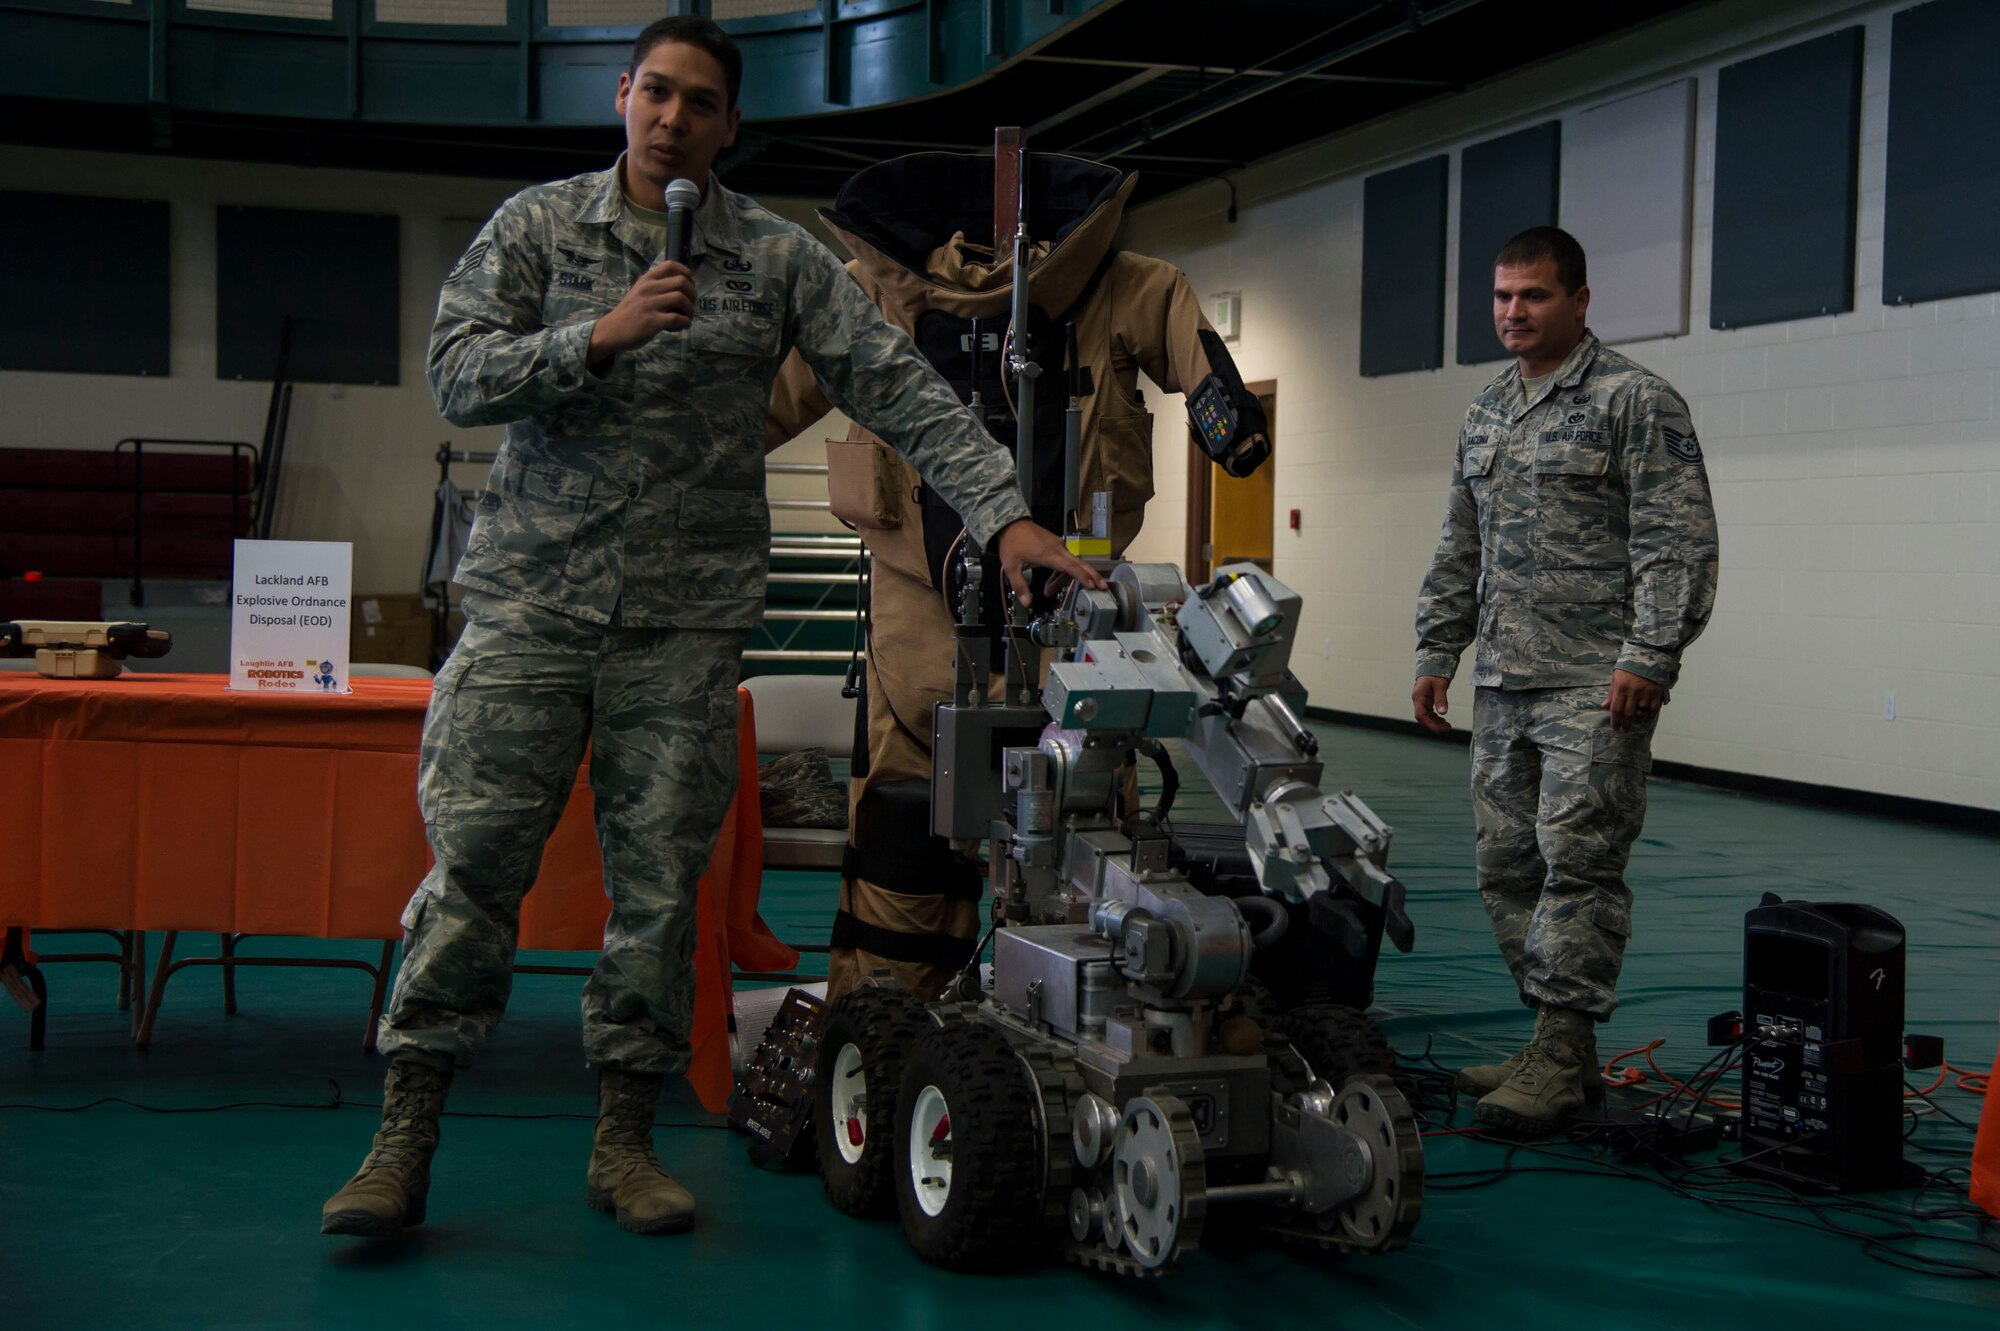 Demonstrators at Laughlin first robot rodeo shows off their creation during cyber awareness week at Laughlin Air Force Base, Texas, Oct. 28, 2017. The robots featured at the rodeo varied from prebuilt creations to explosive ordinance disposal robots from Lackland AFB, Texas.